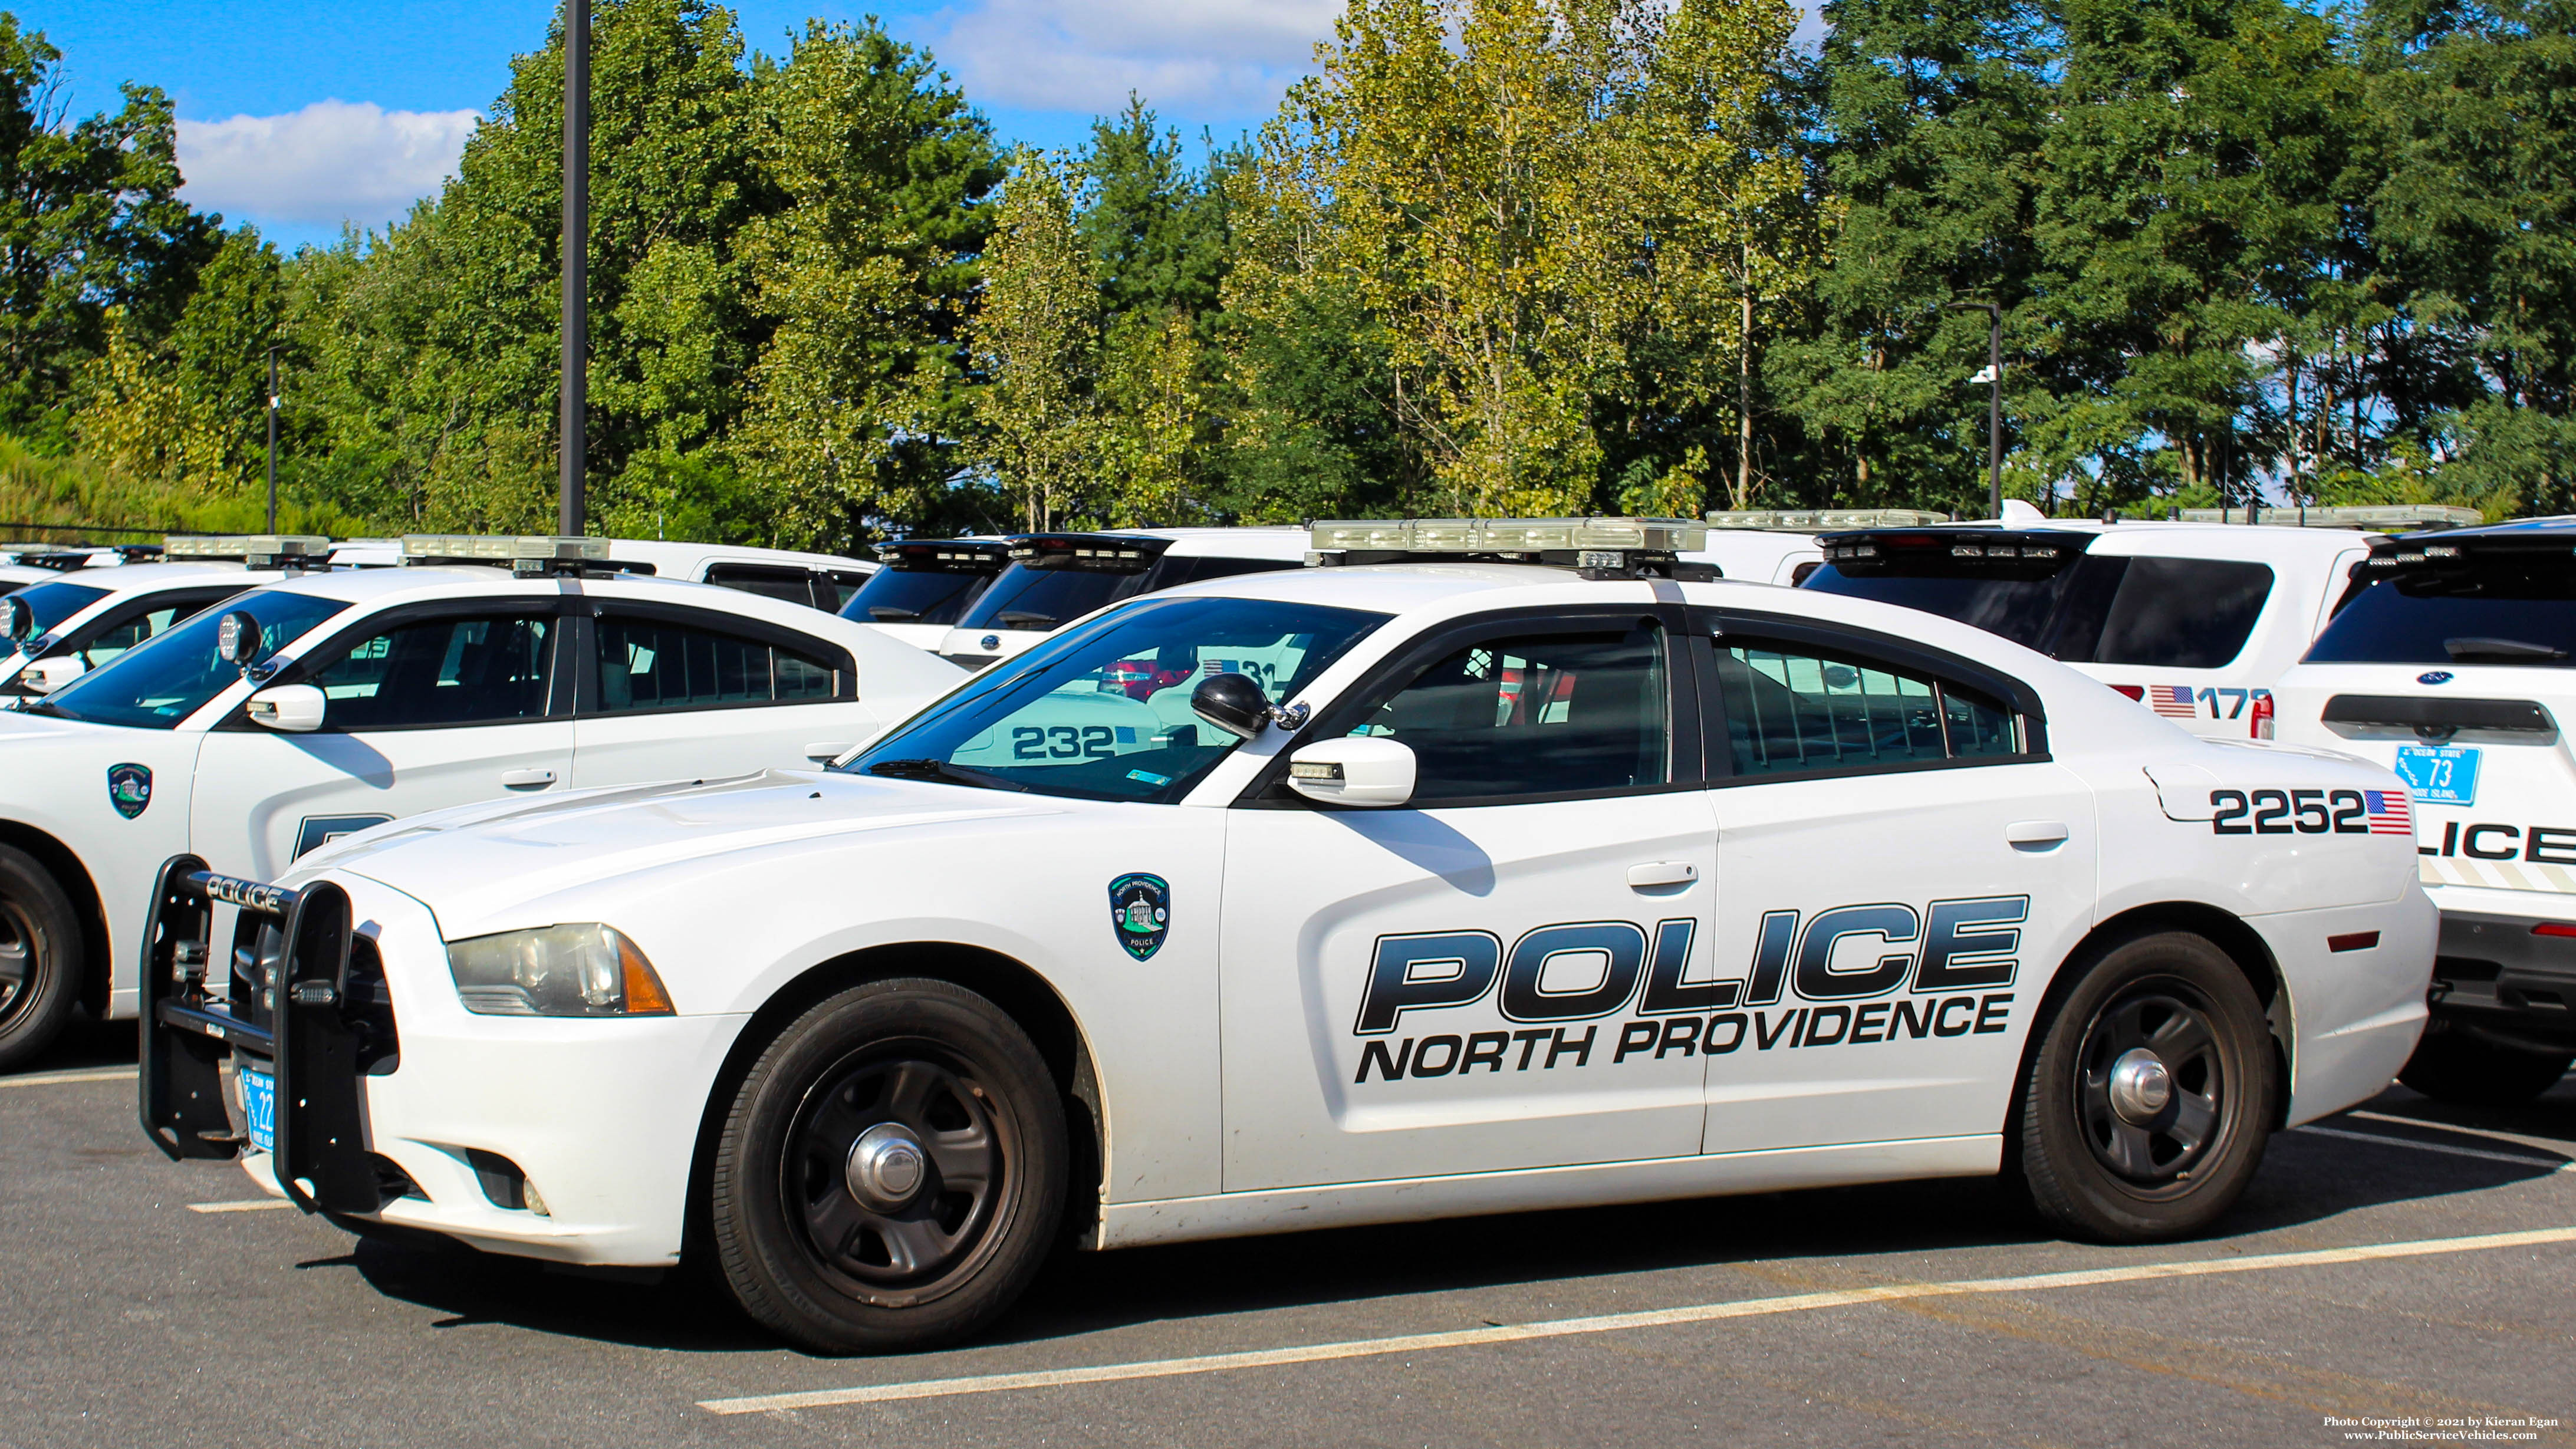 A photo  of North Providence Police
            Cruiser 2252, a 2013 Dodge Charger             taken by Kieran Egan